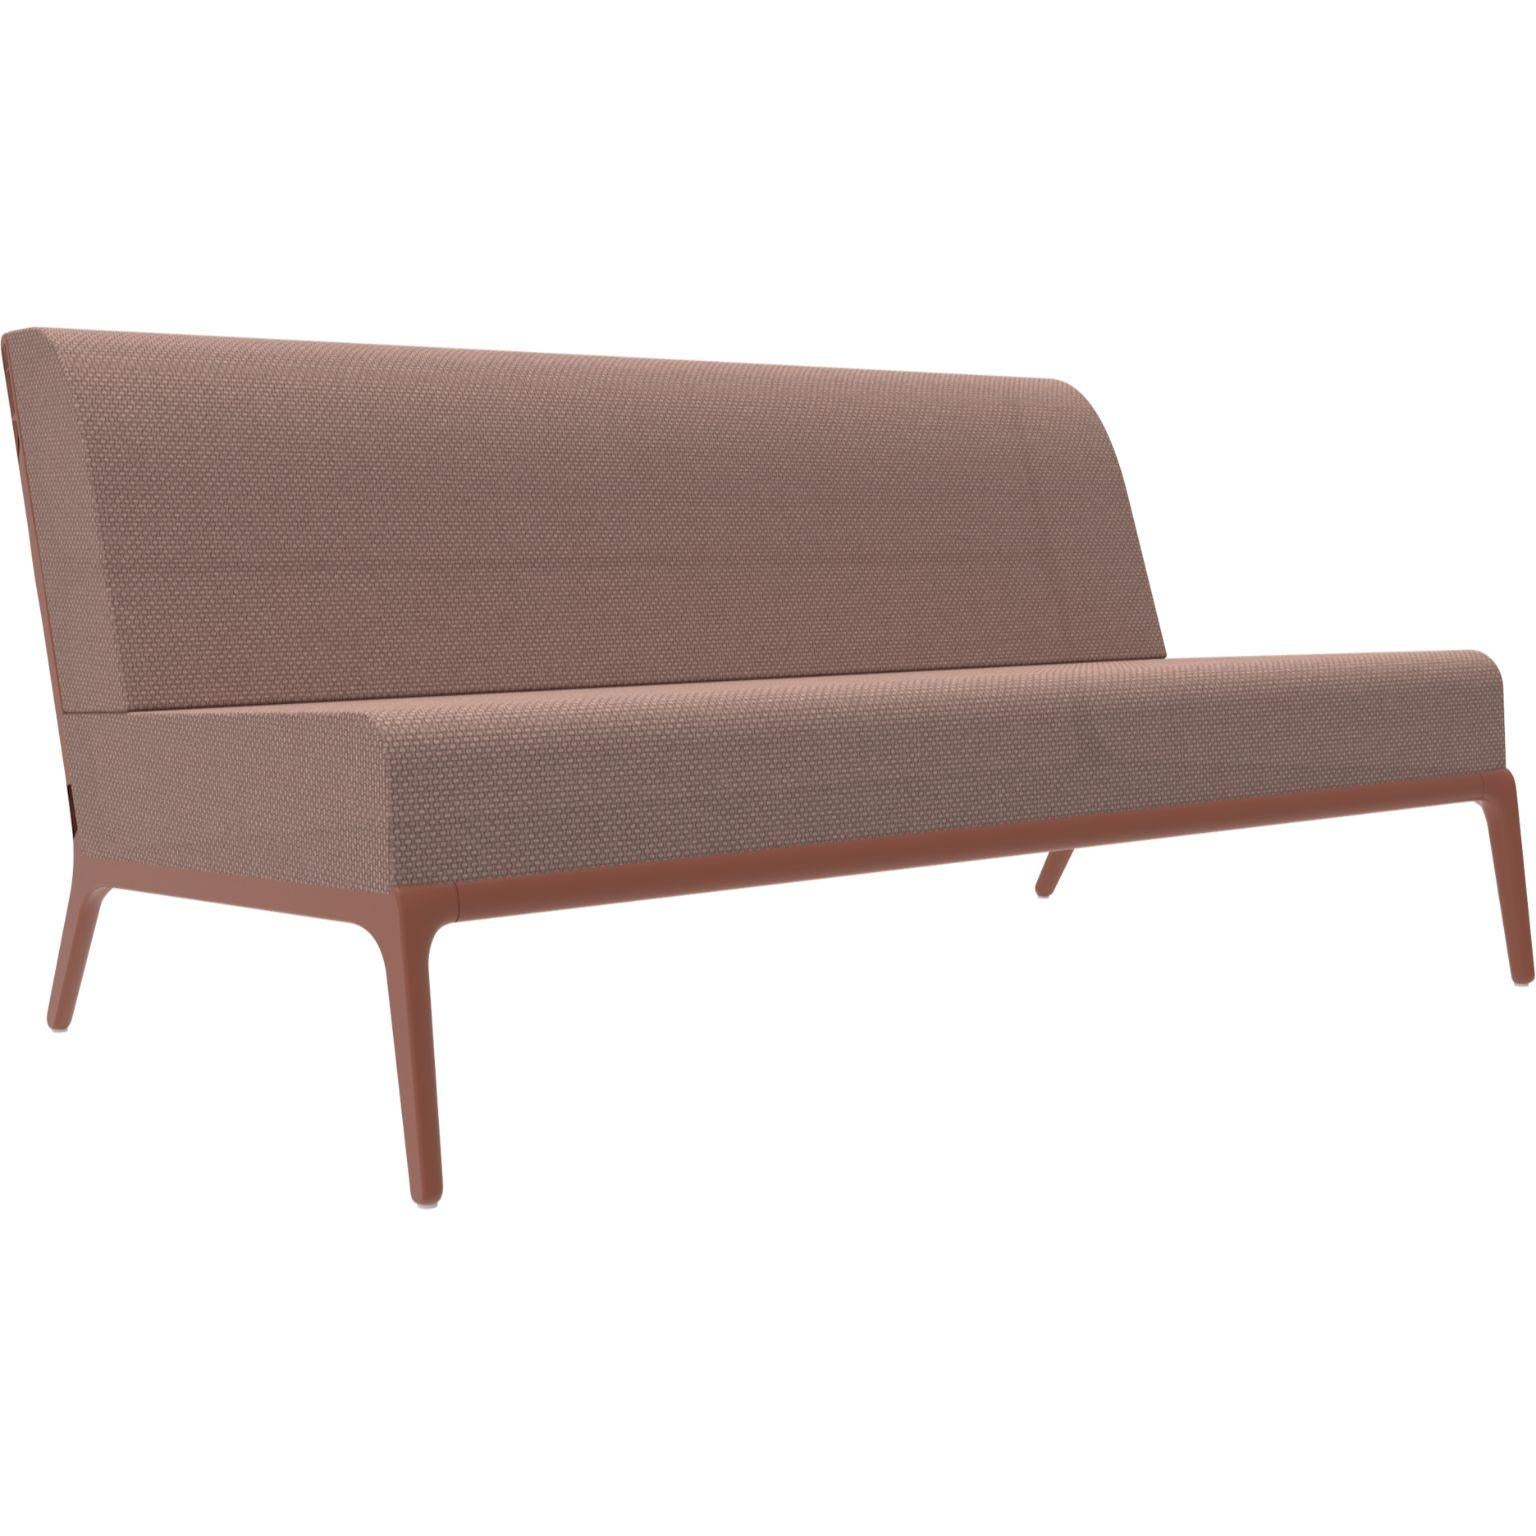 Xaloc Central 160 Salmon modular sofa by Mowee
Dimensions: D 100 x W 160 x H 81 cm (Seat height 42cm)
Material: Aluminium, Textile
Weight: 35.5 kg
Also available in different colours and finishes.

 Xaloc synthesizes the lines of interior